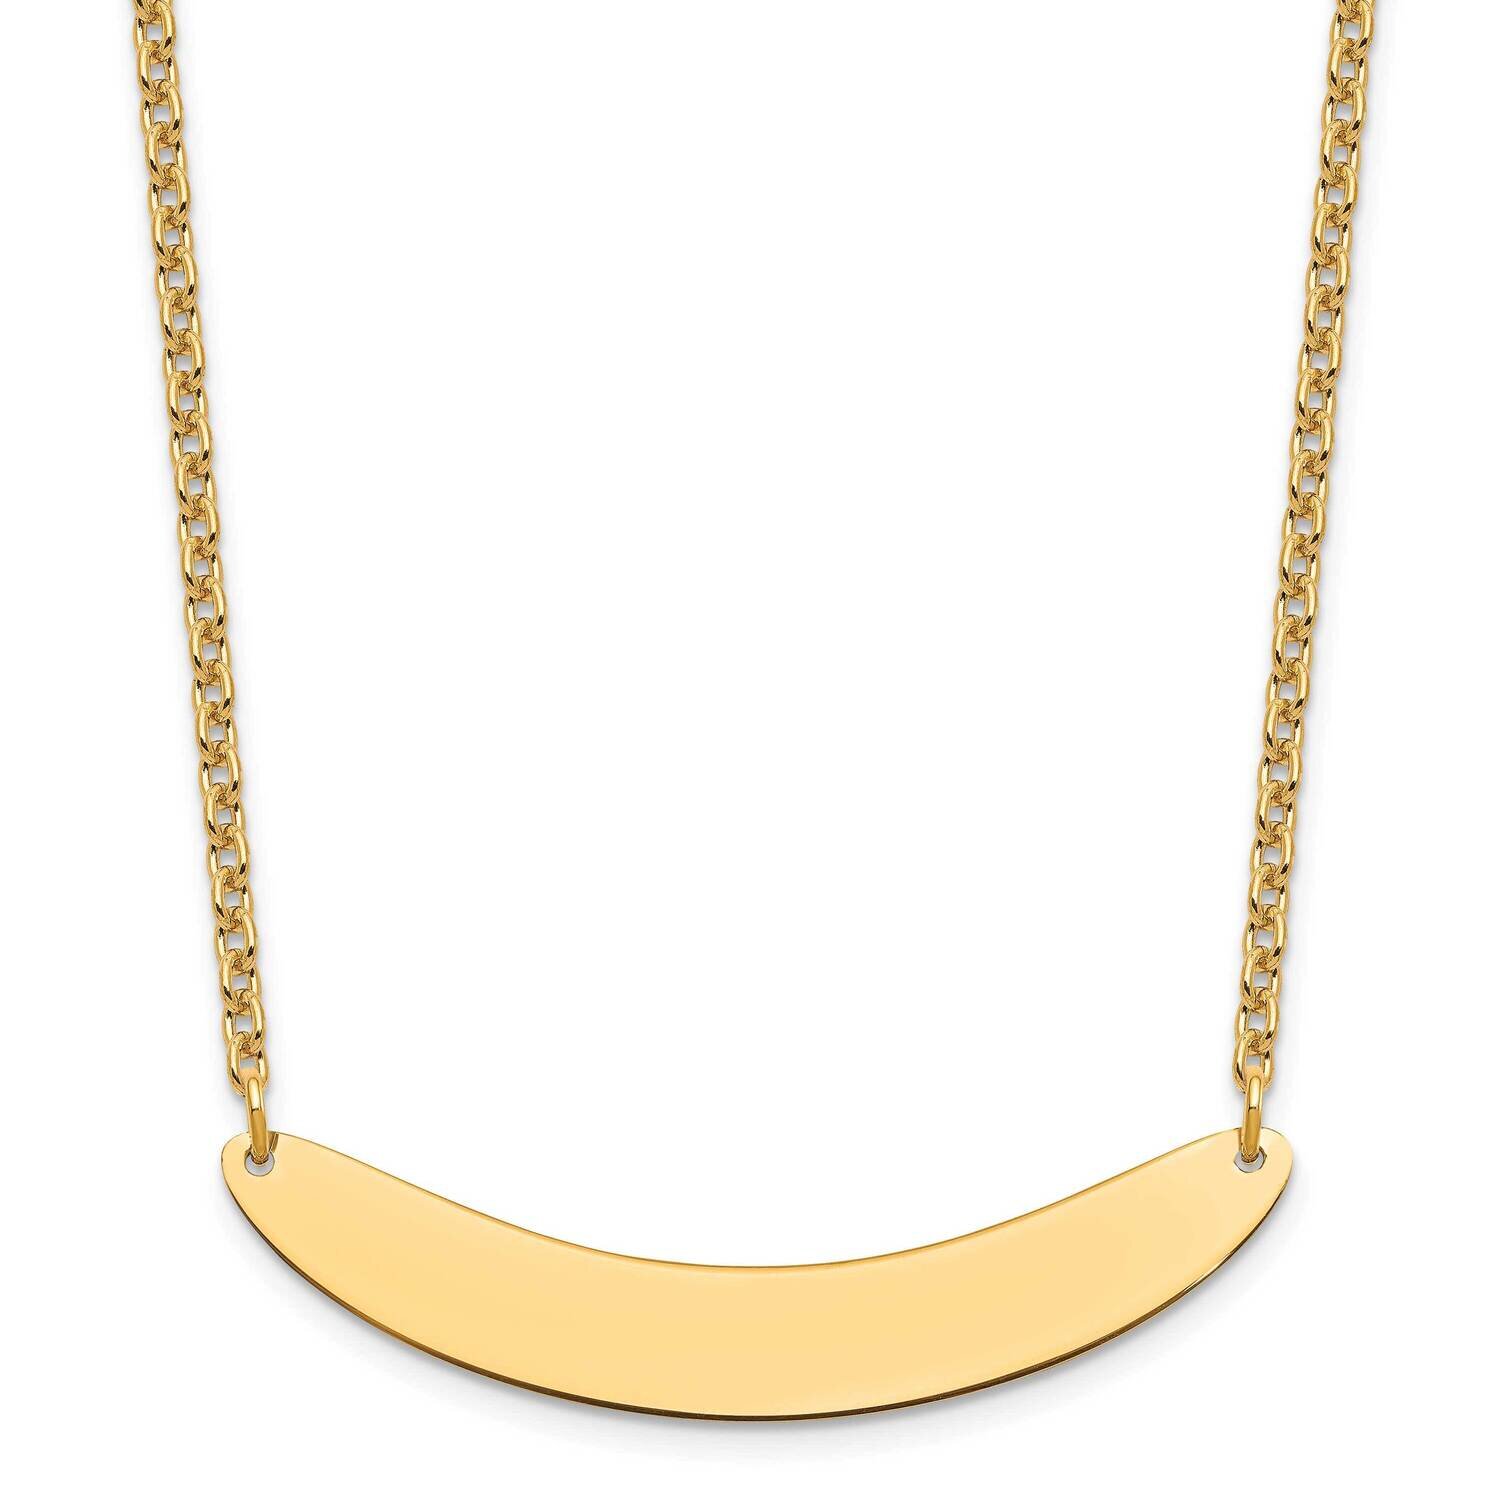 Medium Polished Curved Blank Bar Necklace Gold-plated Sterling Silver XNA1206GP